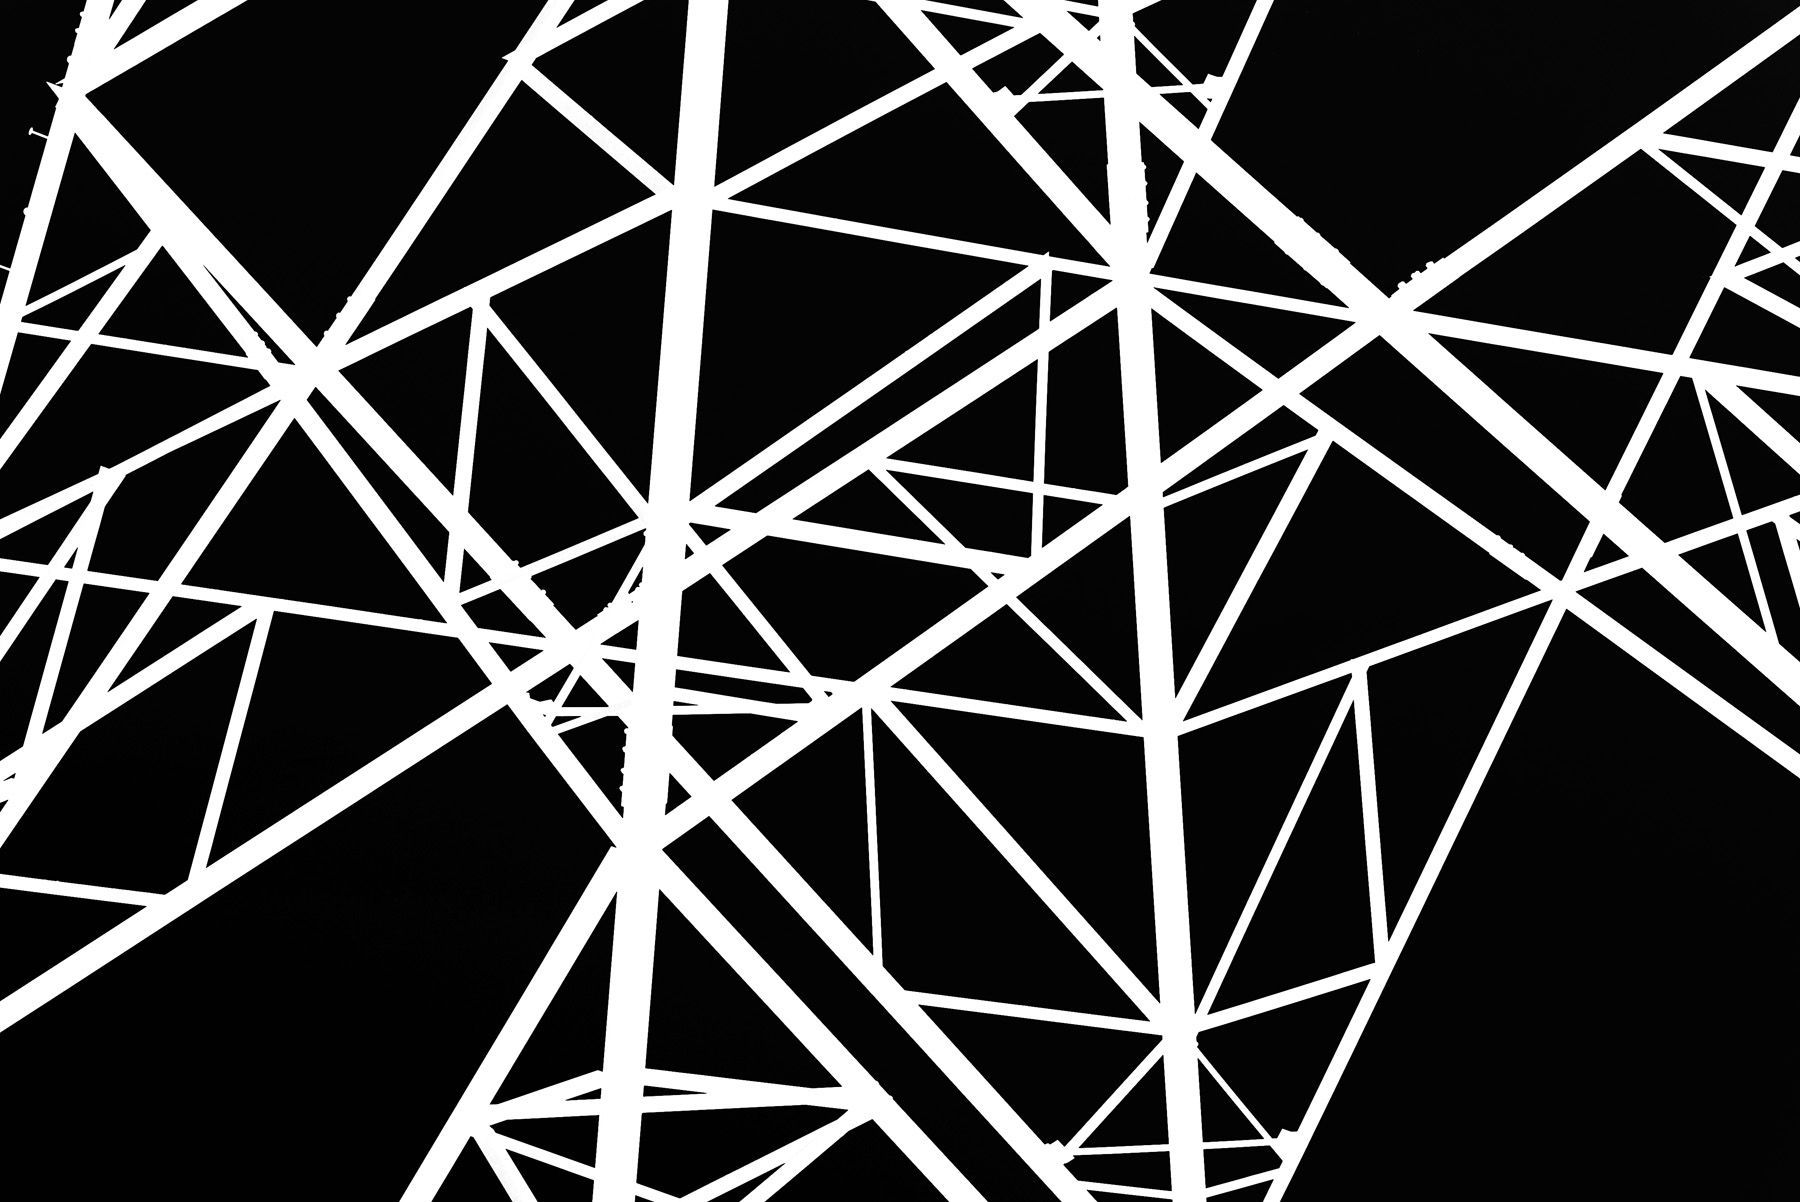 Scratchboard style abstraction of a transmission tower